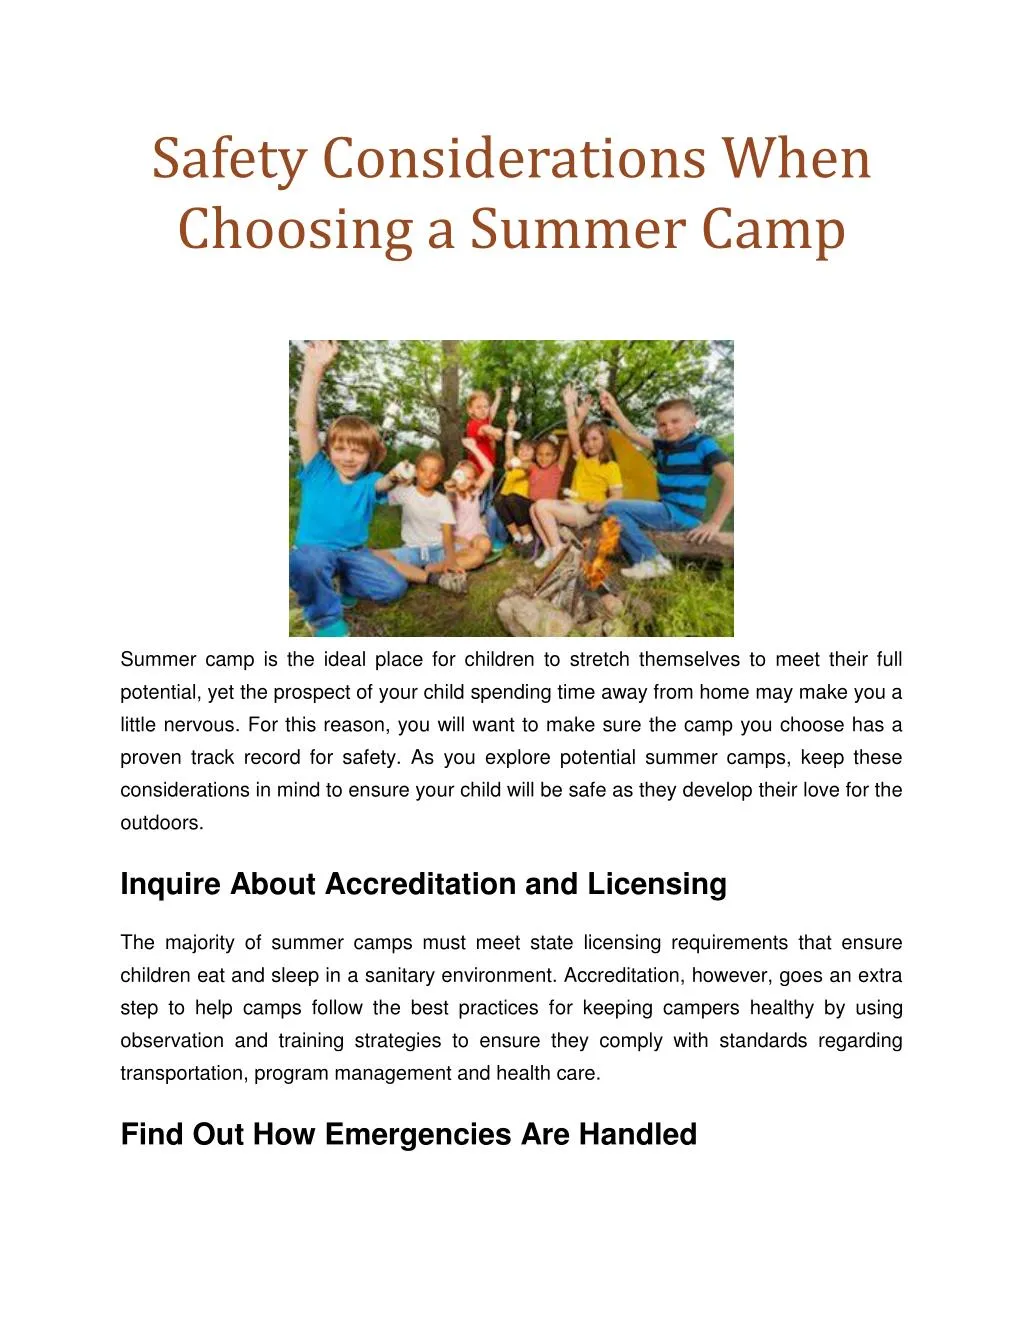 PPT Safety Considerations When Choosing a Summer Camp PowerPoint